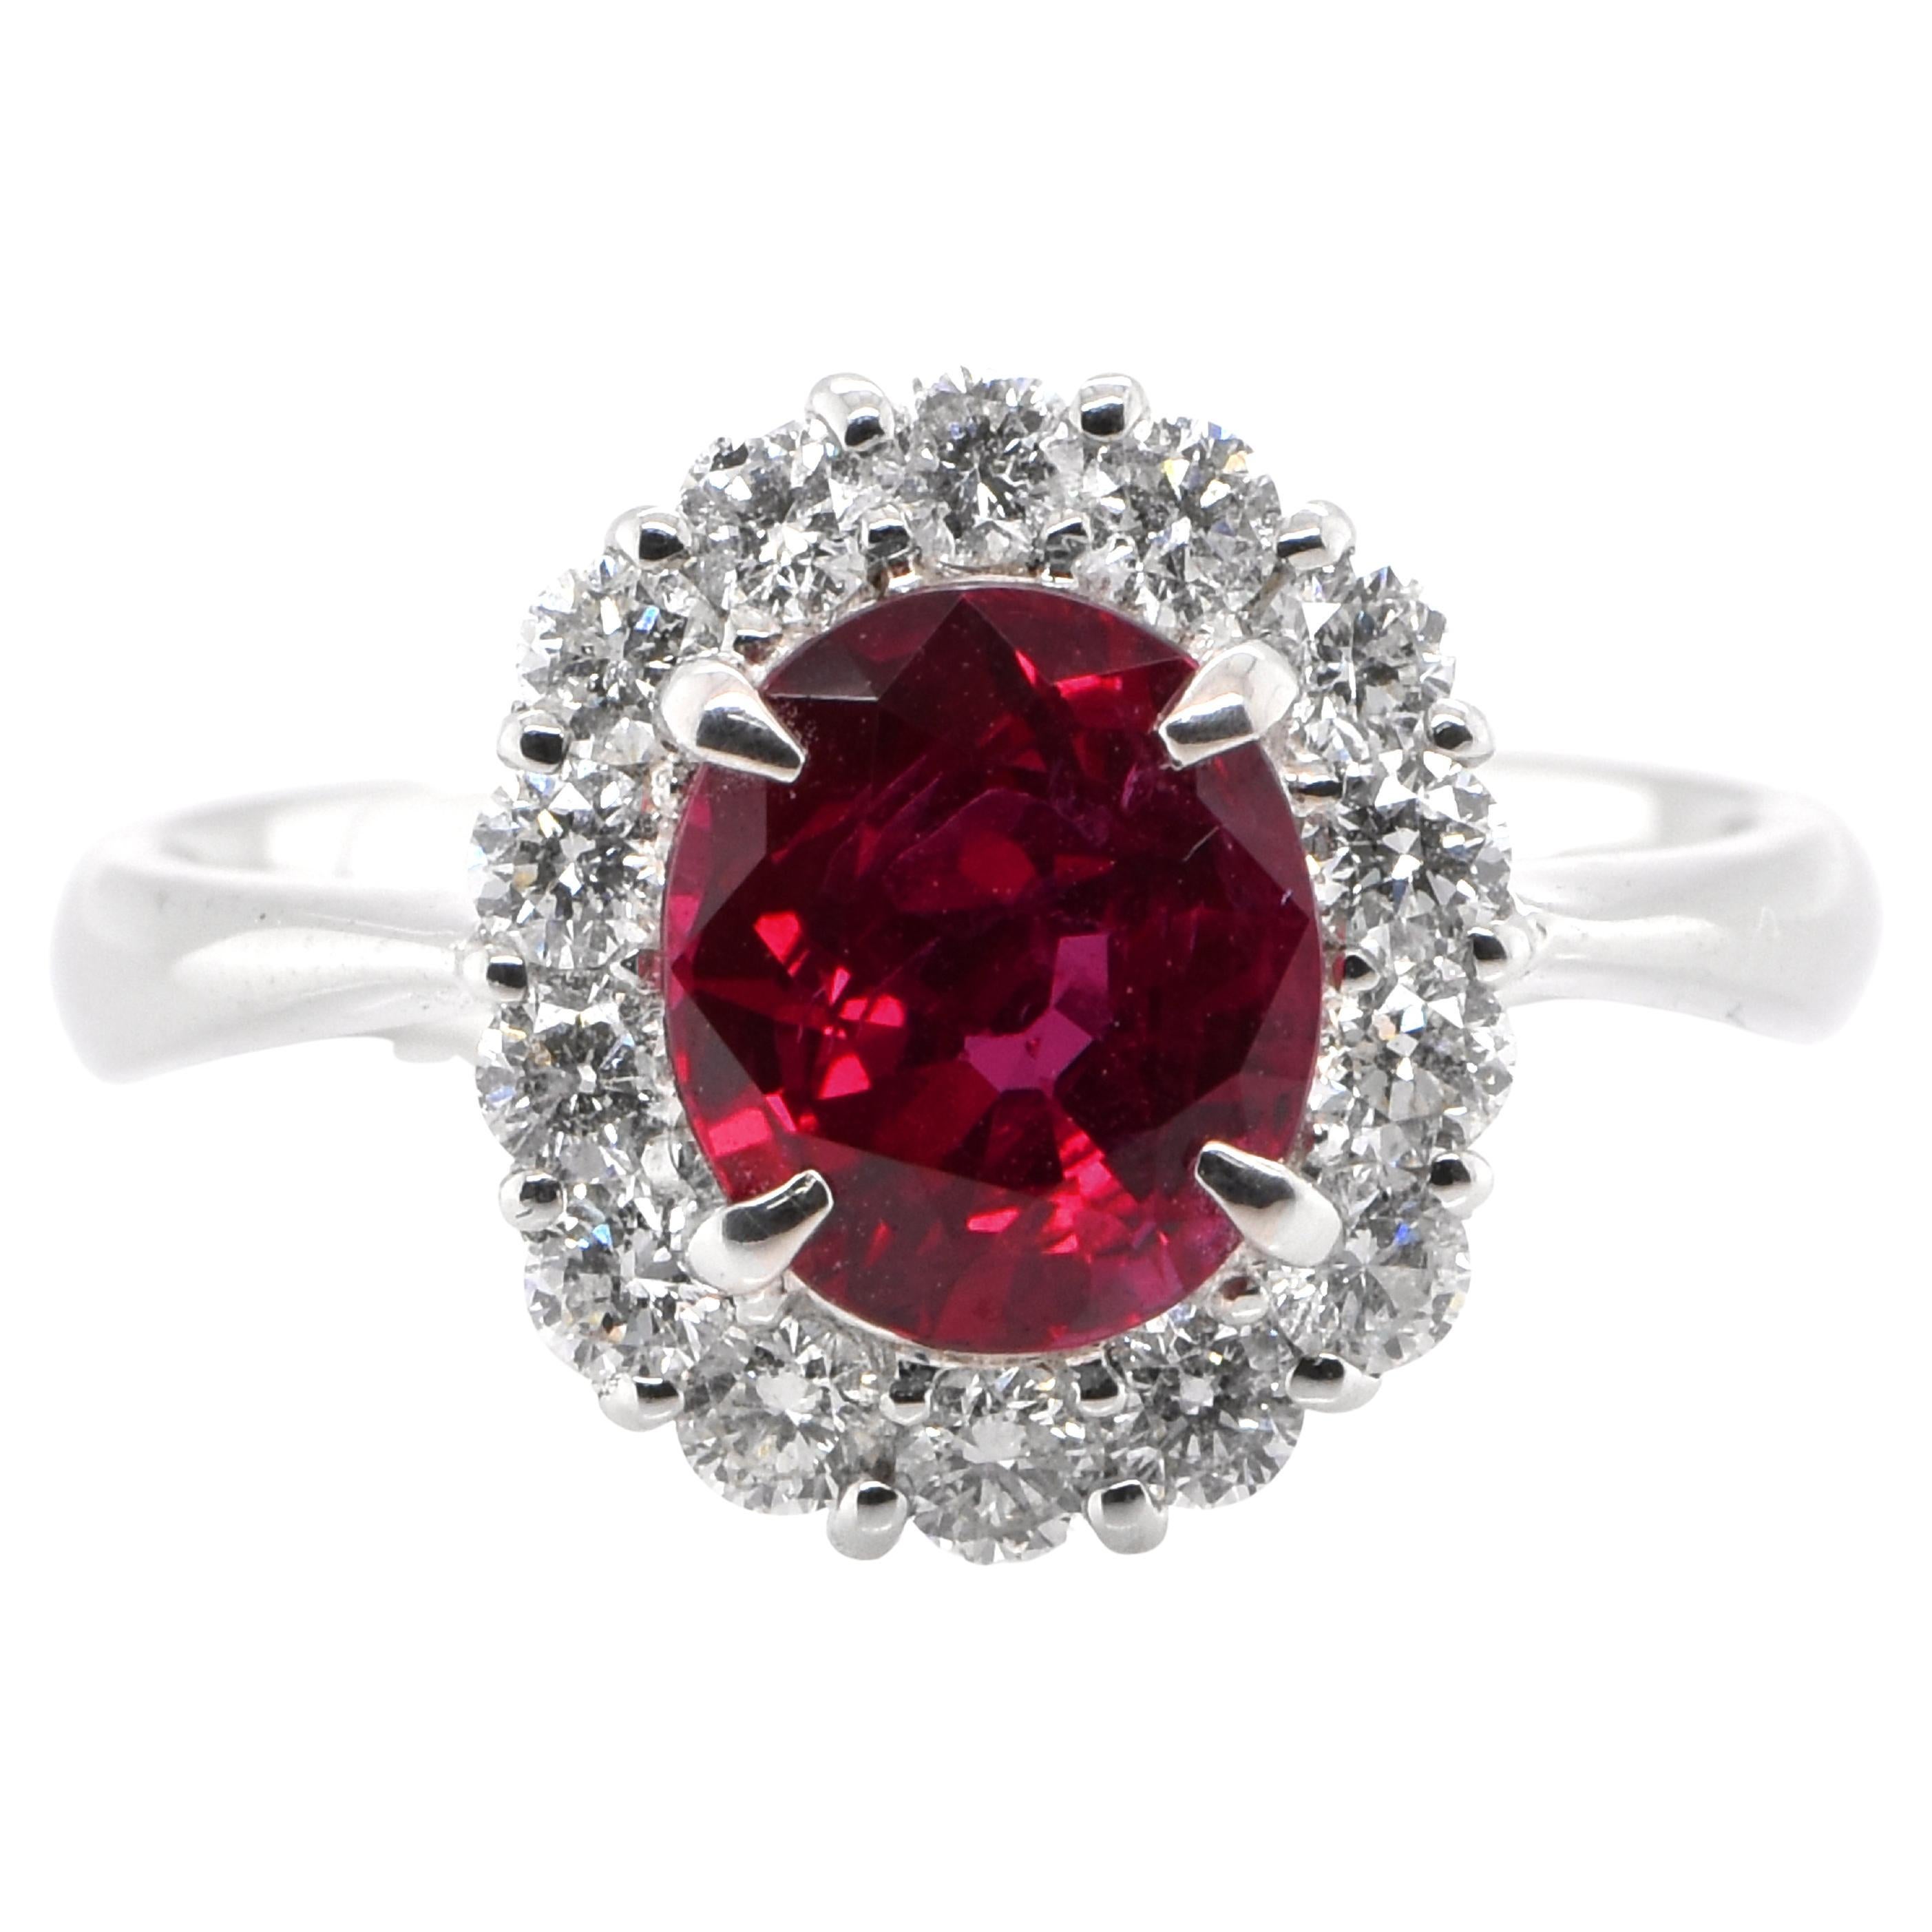 GRS Certified 2.33 Carat Natural, Vivid Red, Thai Ruby Halo Ring Set in Platinum For Sale